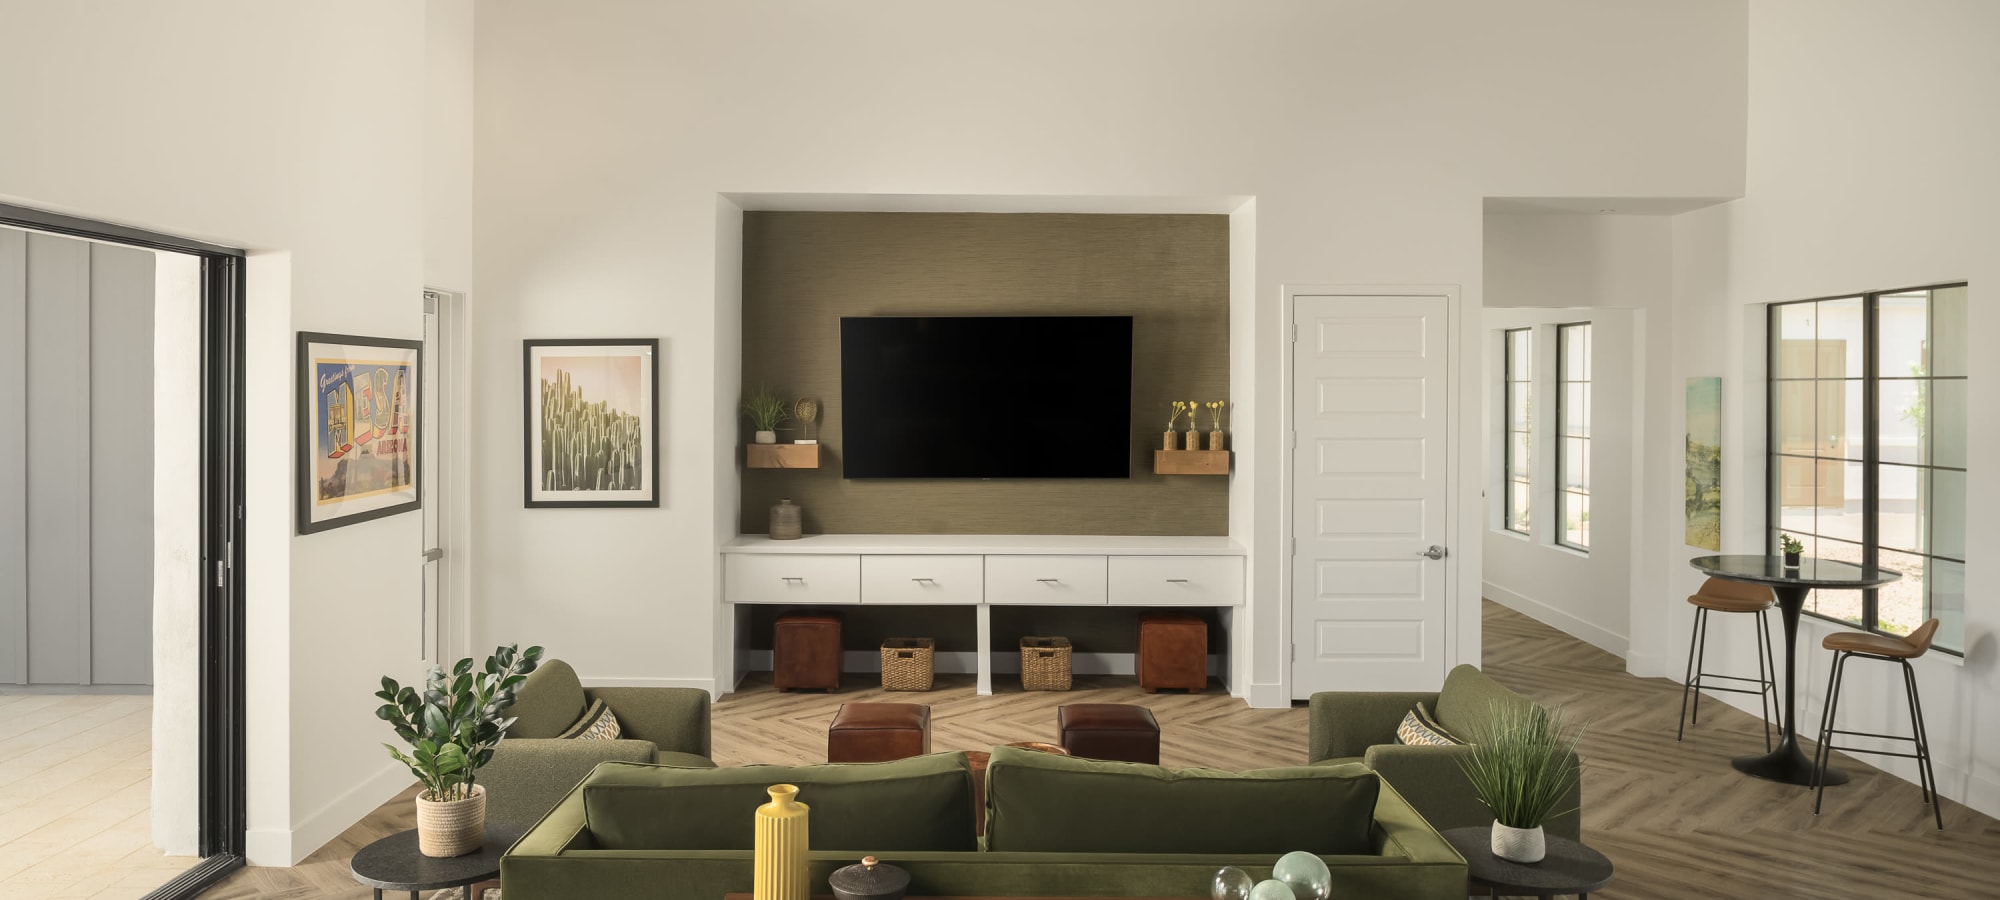 TV area in resident clubhouse at Peralta Vista in Mesa, Arizona